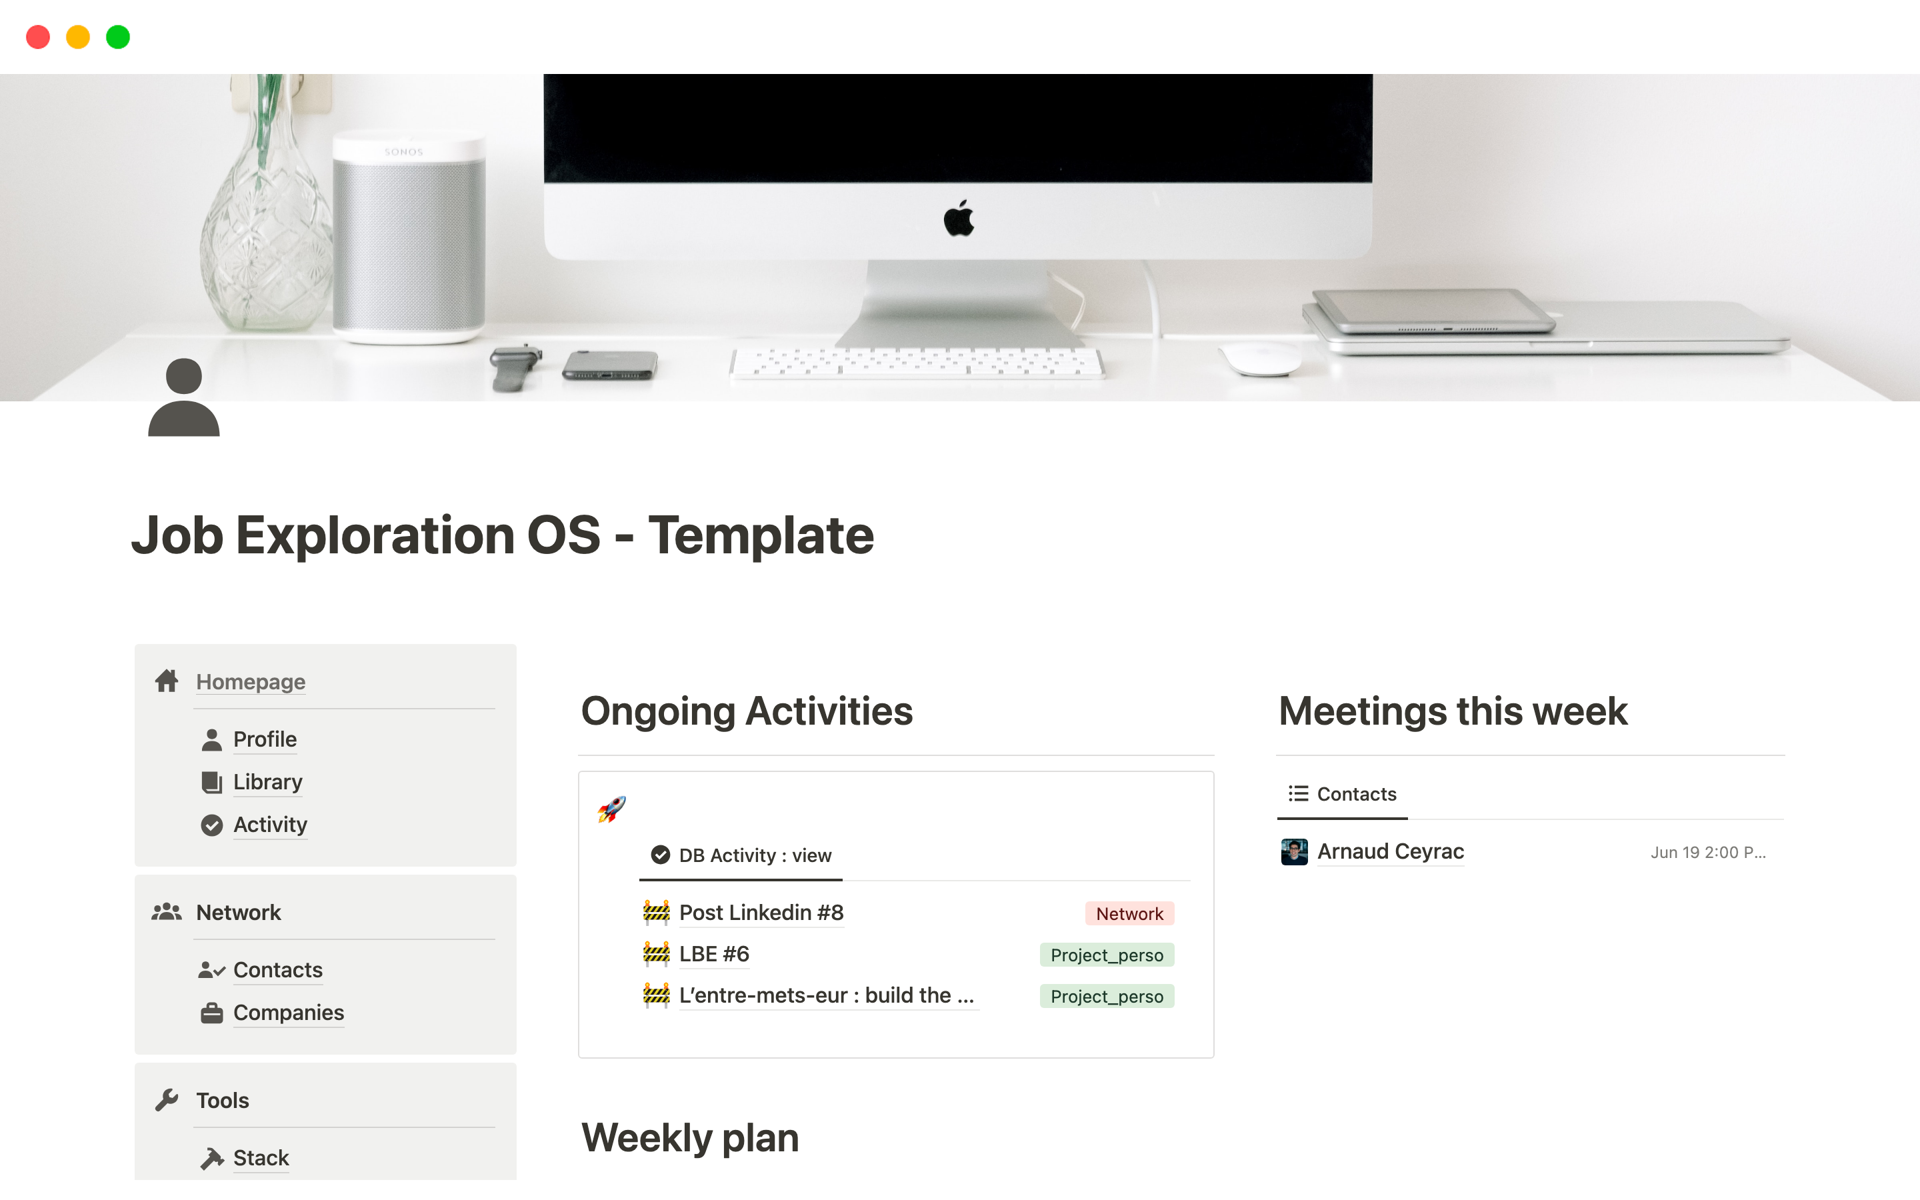 This template allows you to monitor your exploration phase of a new job (contacts, companies, training, media monitoring etc.)